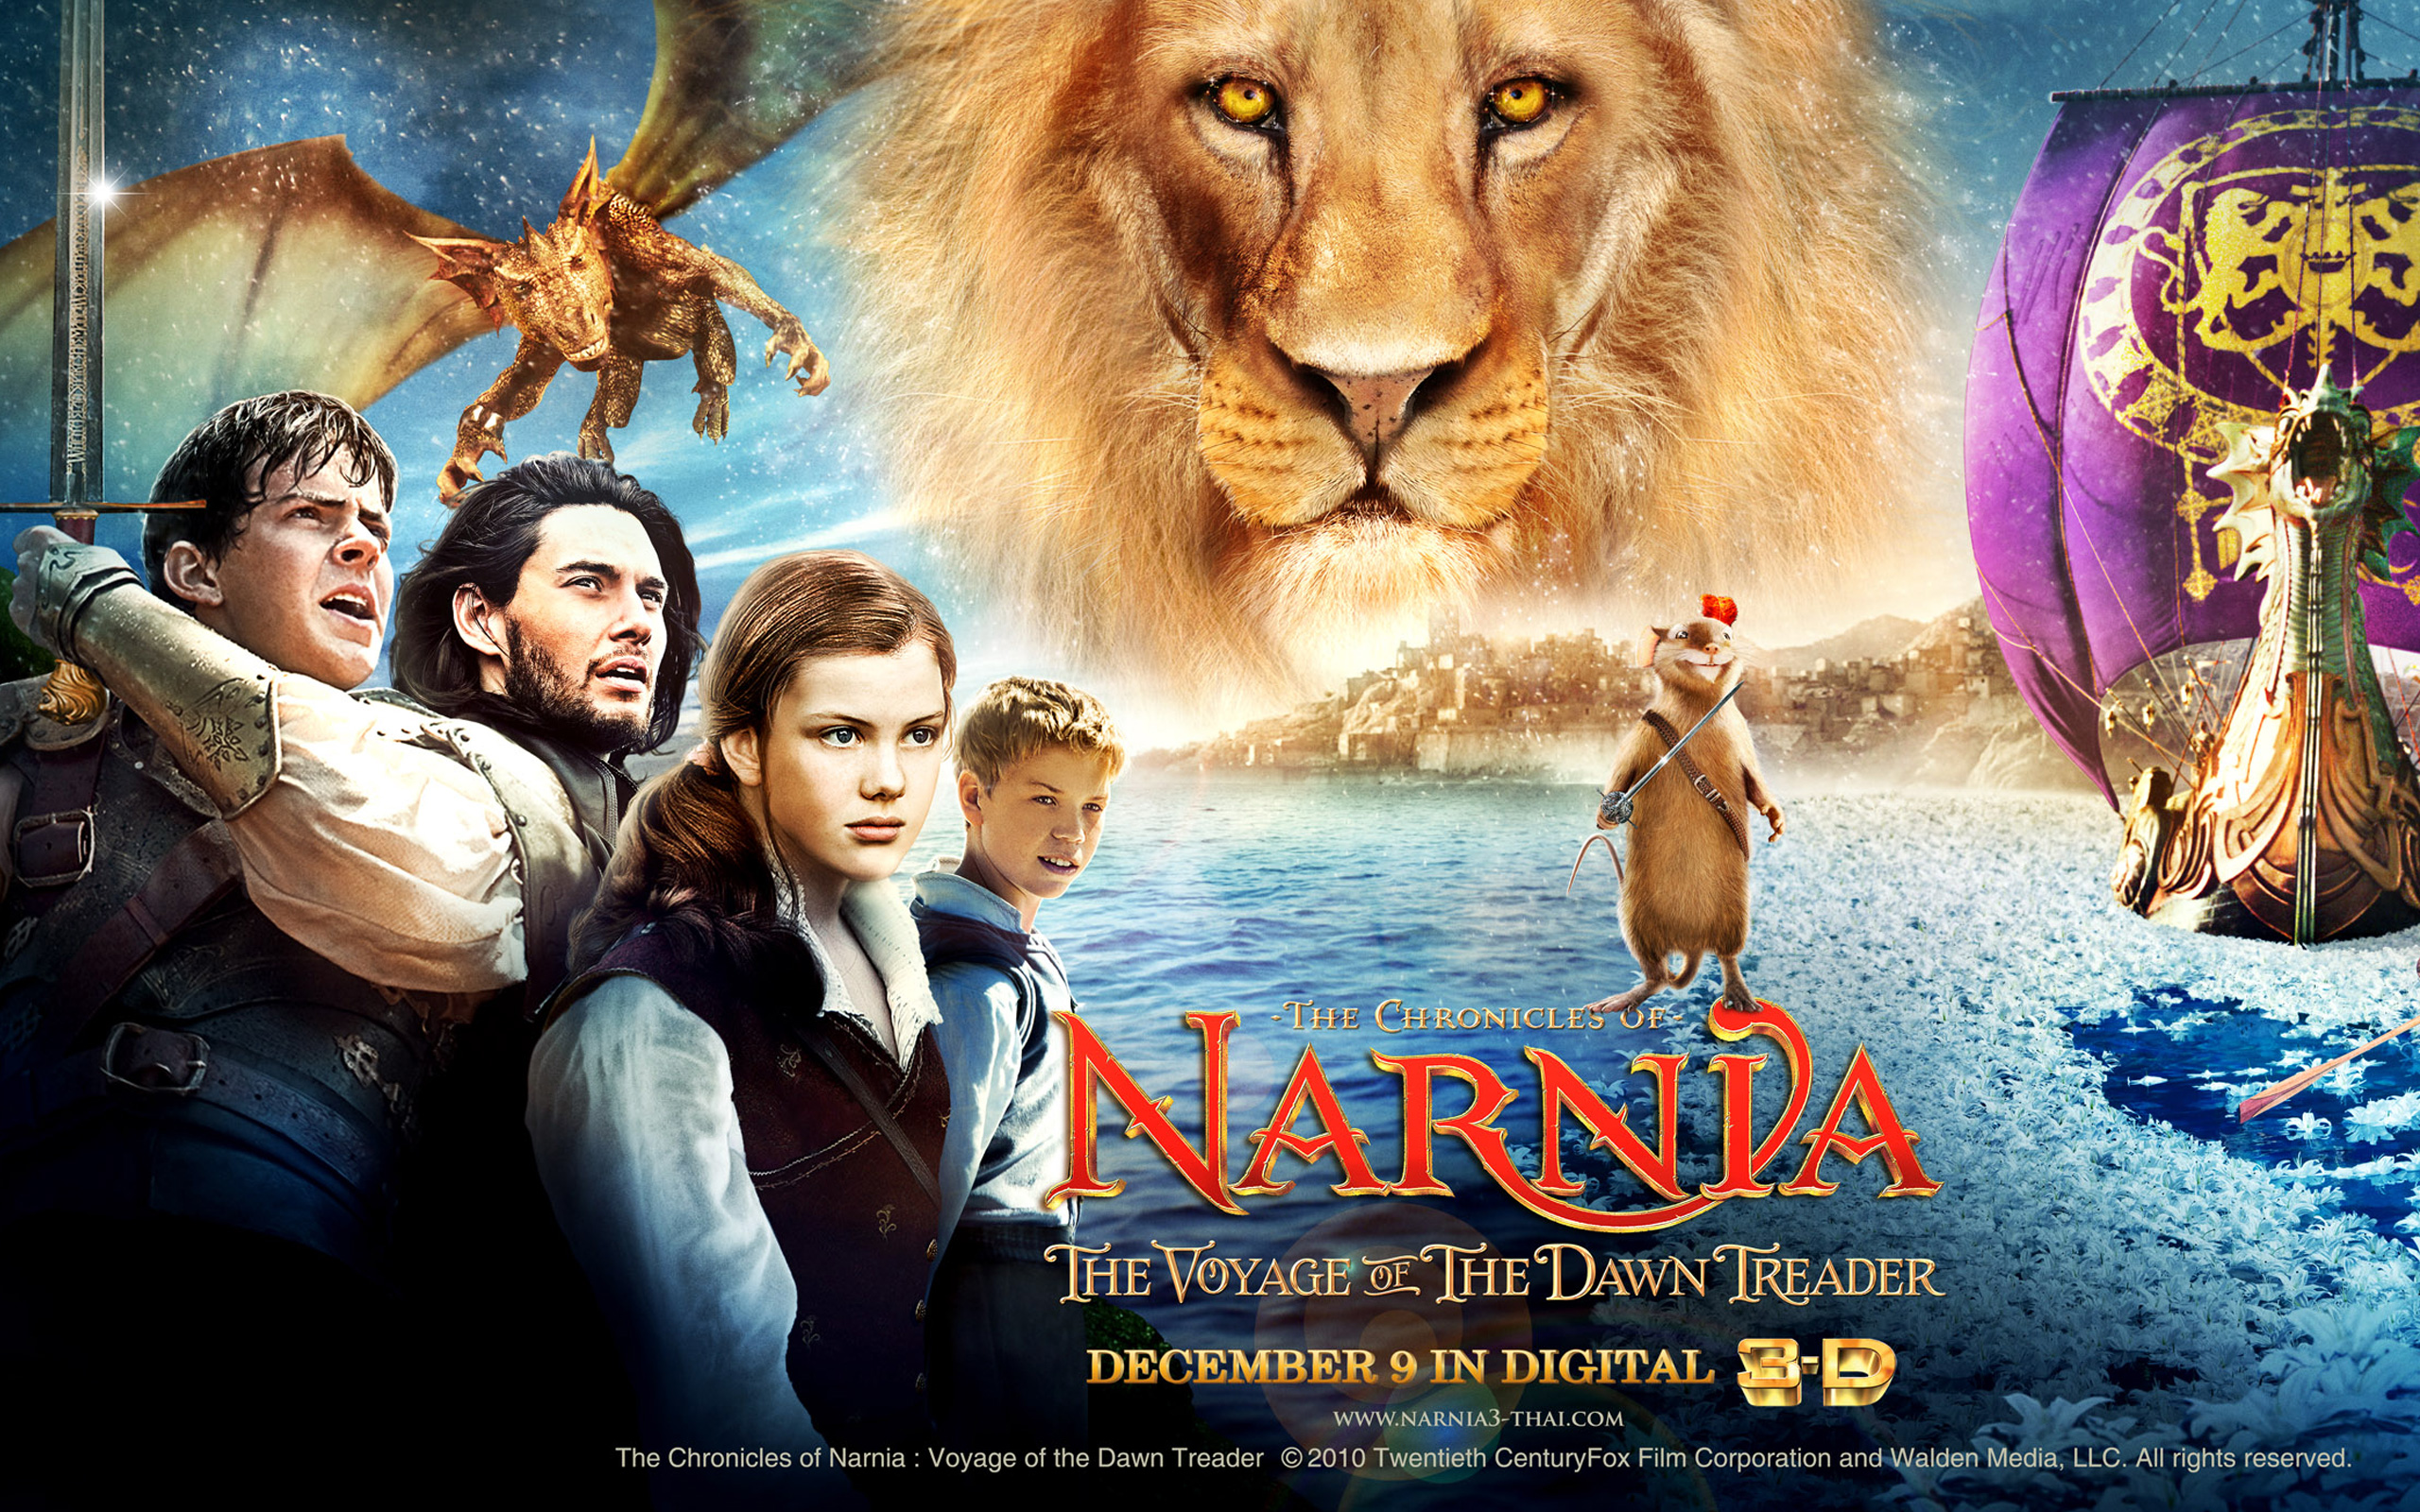 Chronicles Of Narnia Images Wallpapers